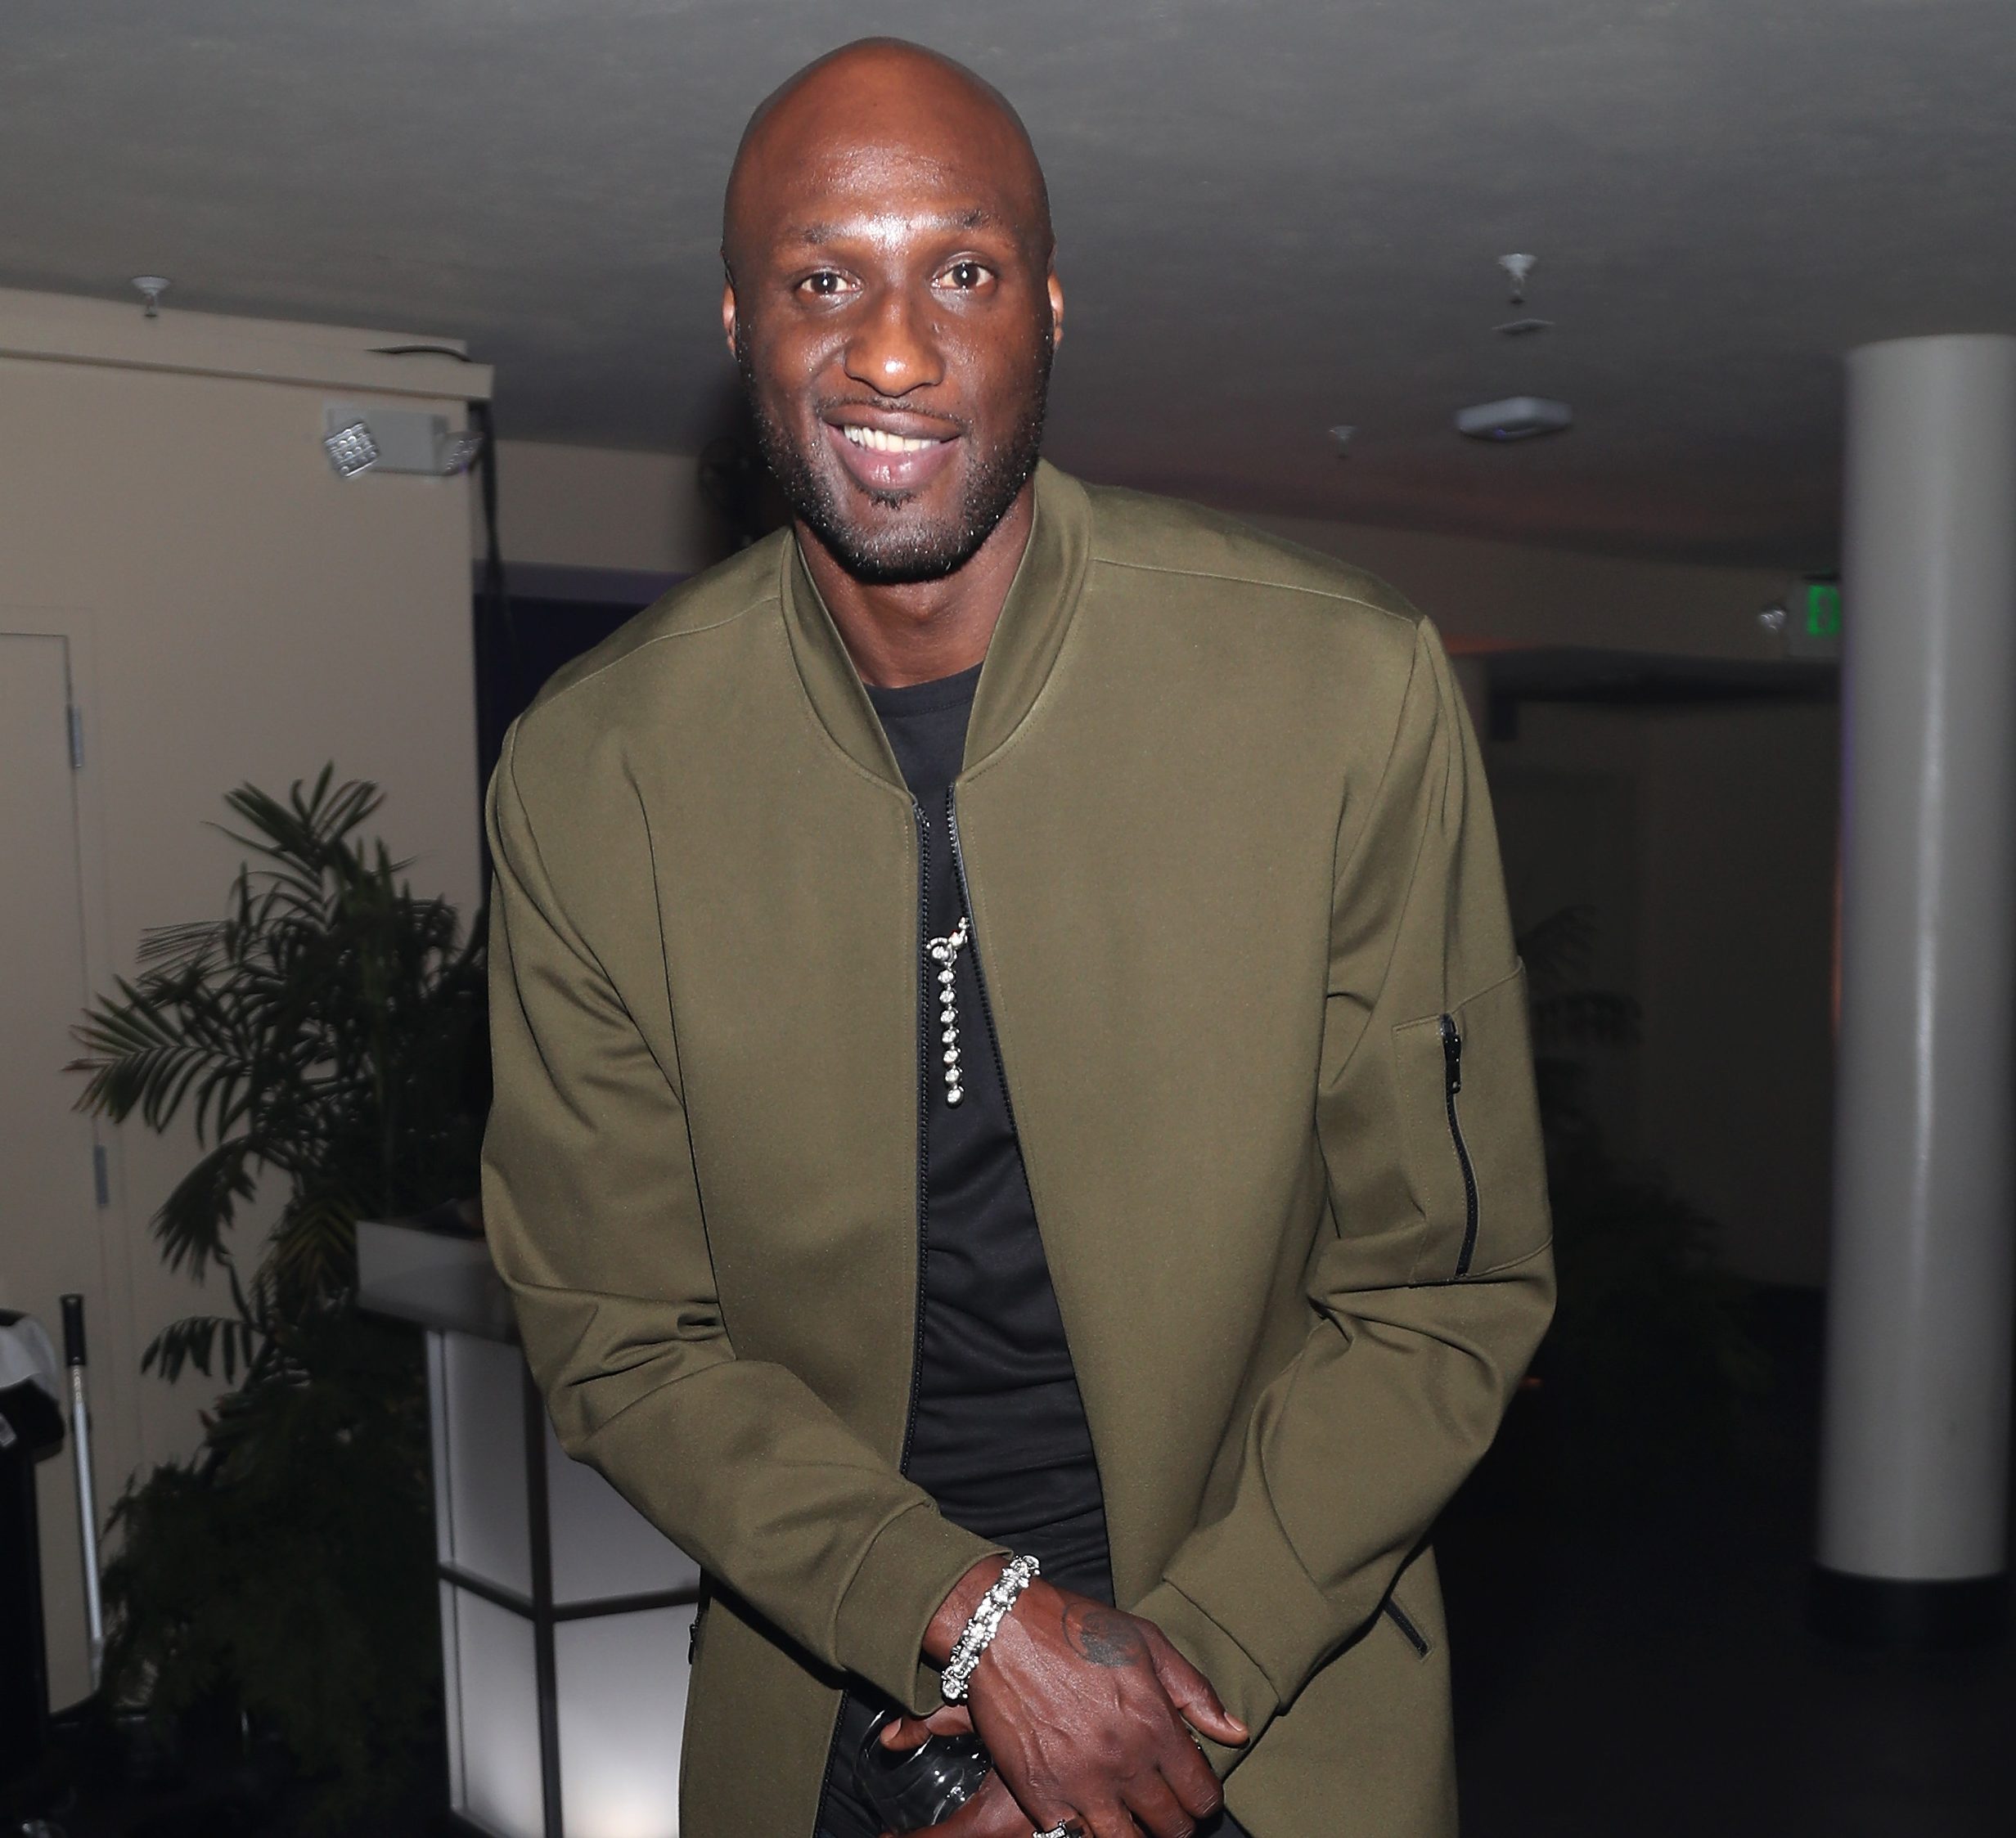 Lamar Odom Expresses How Much He Still Loves And Misses Khloe Kardashian On Latest Episode Of ‘Celebrity Big Brother’ thumbnail